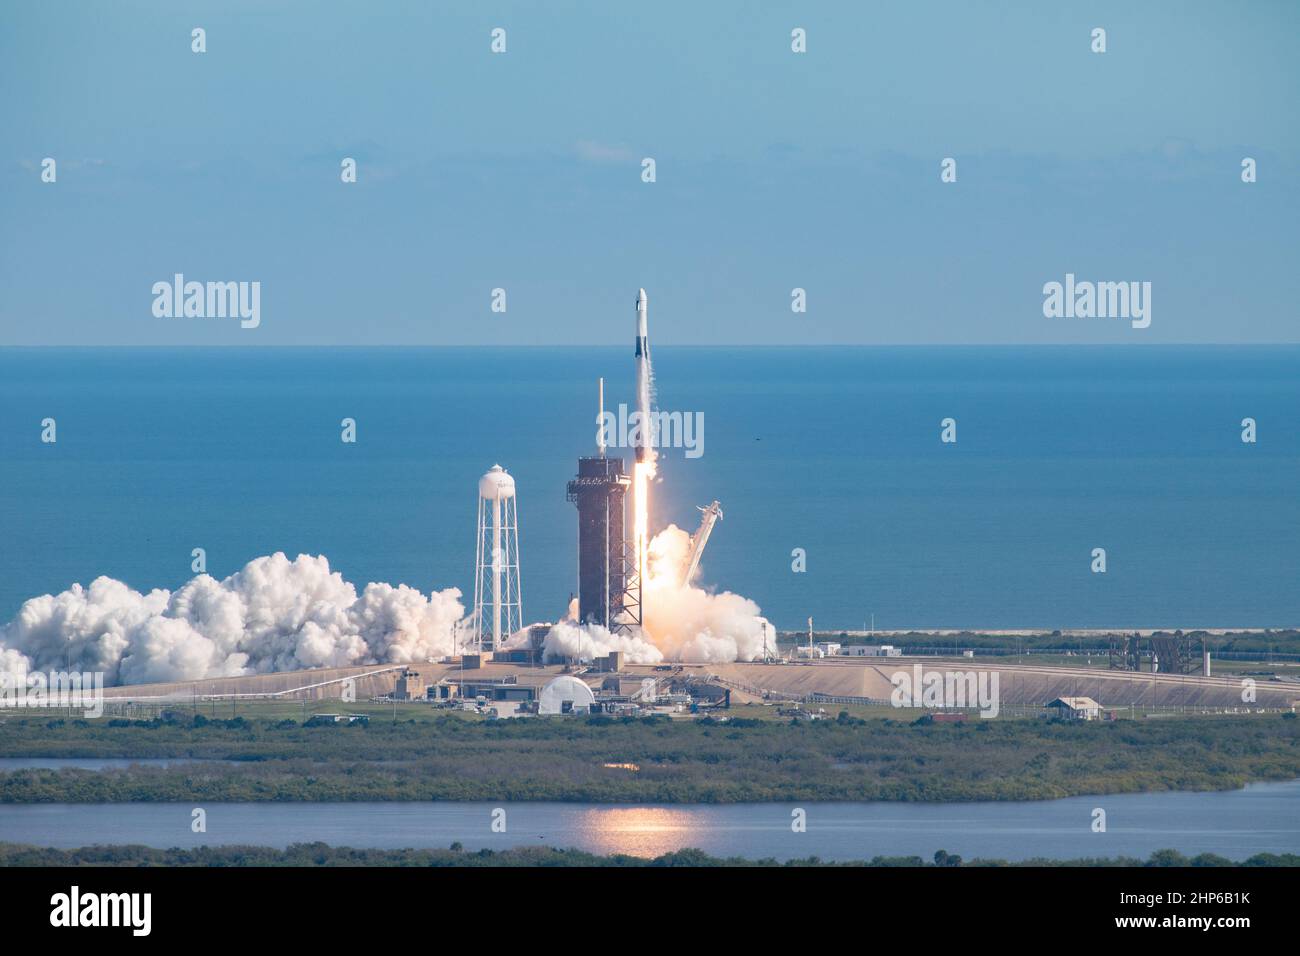 A SpaceX Falcon 9 rocket lifts off from Launch Complex 39A at Kennedy Space Center in Florida at 11:17 a.m. EST on Dec. 6, 2020, carrying the uncrewed cargo Dragon spacecraft on its journey to the International Space Station for NASA and SpaceX’s 21st Commercial Resupply Services (CRS-21) mission Stock Photo